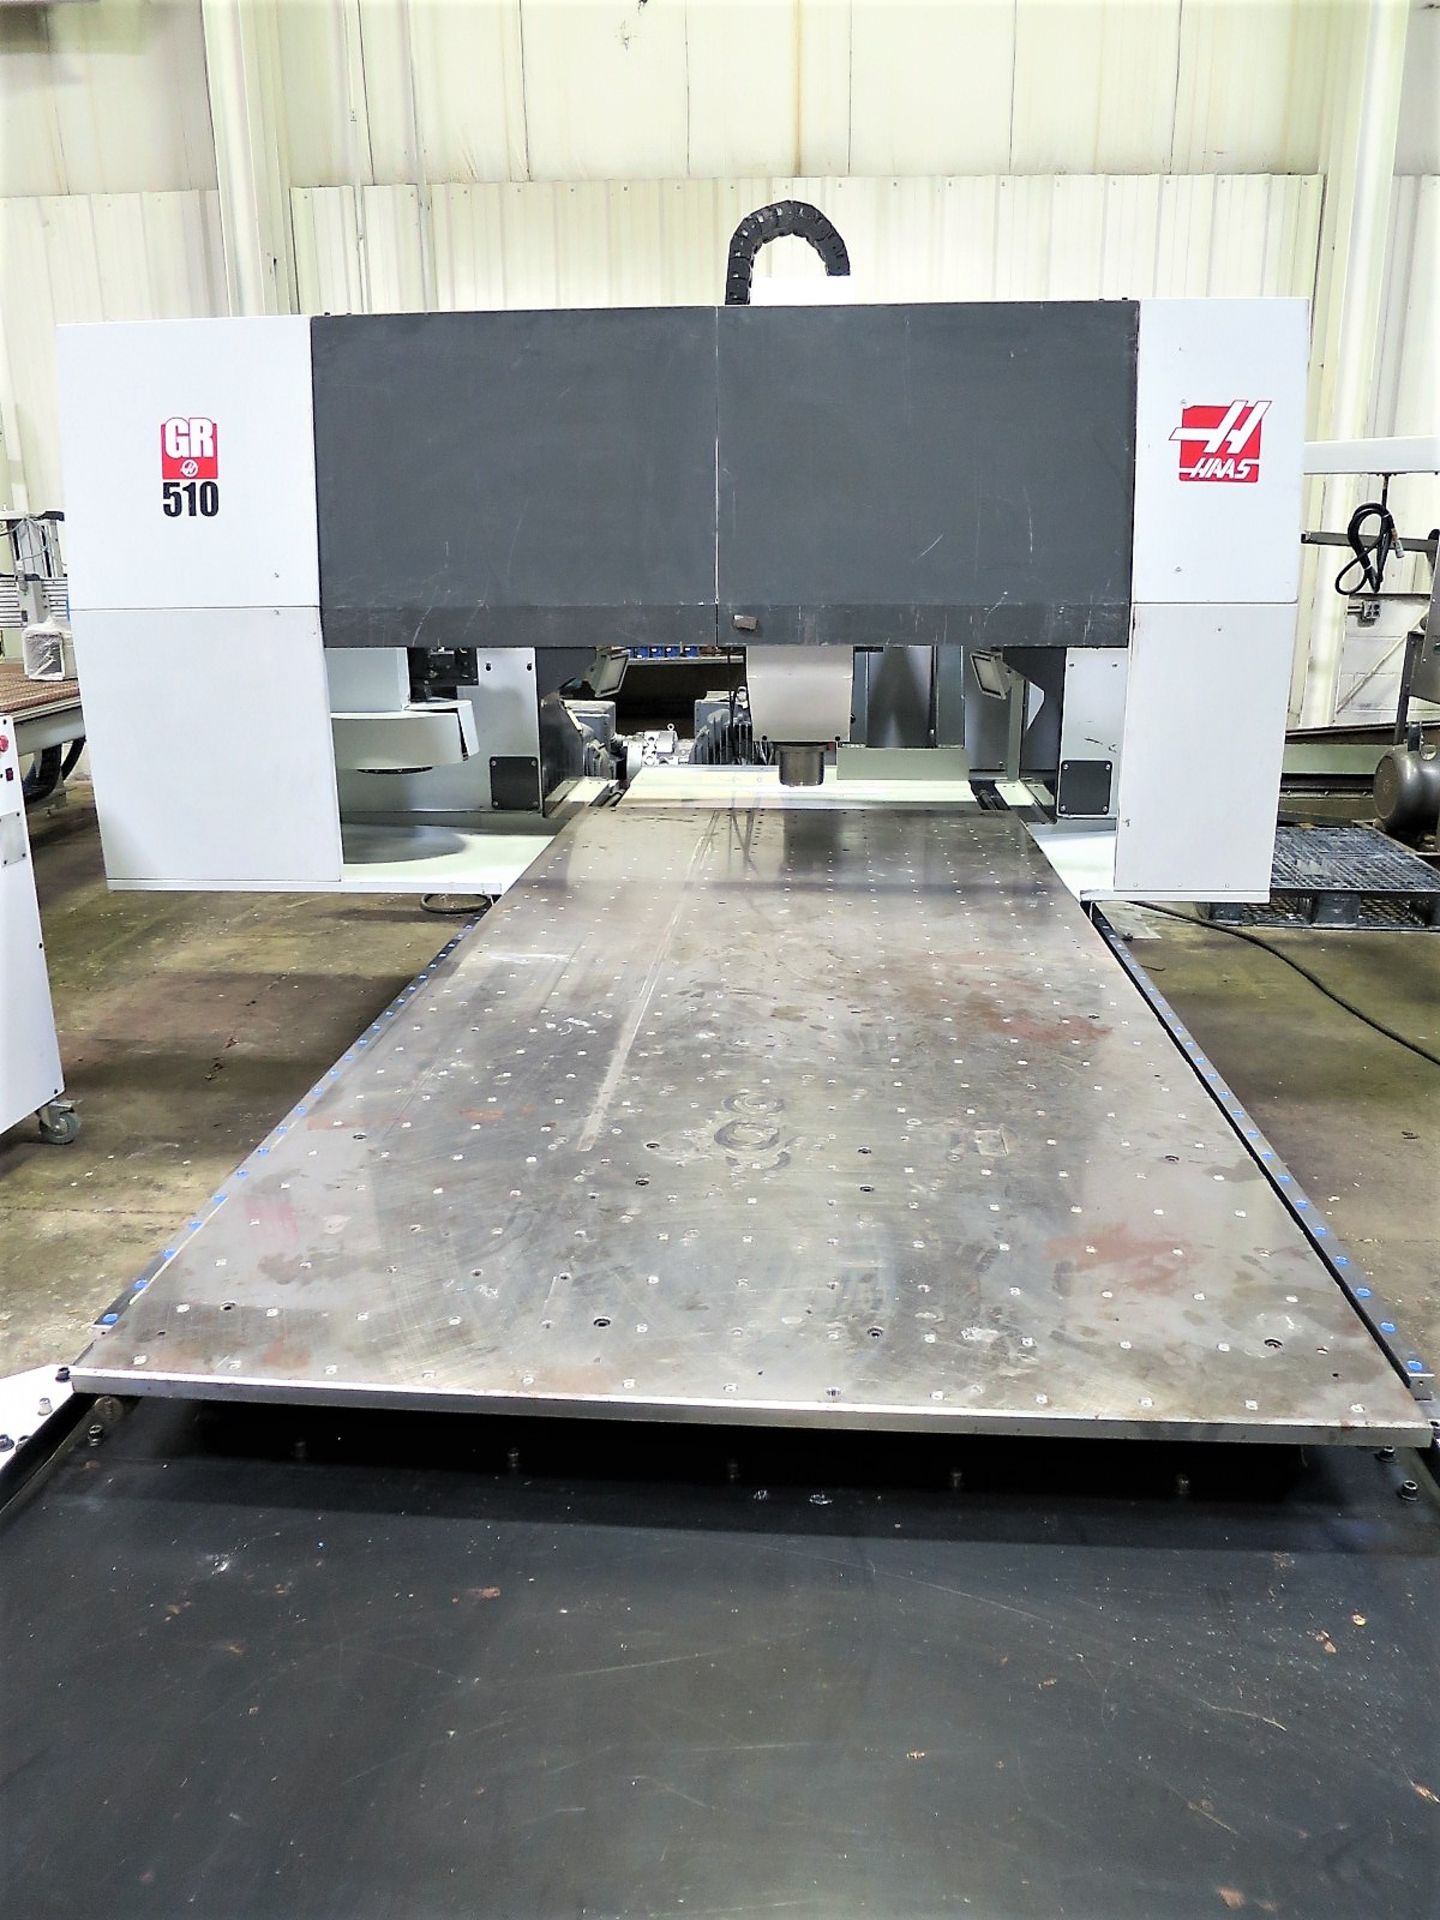 5'X10' Haas Model GR510 3-Axis CNC Router Vertical, S/N 1115694, New 20014 - Image 8 of 10